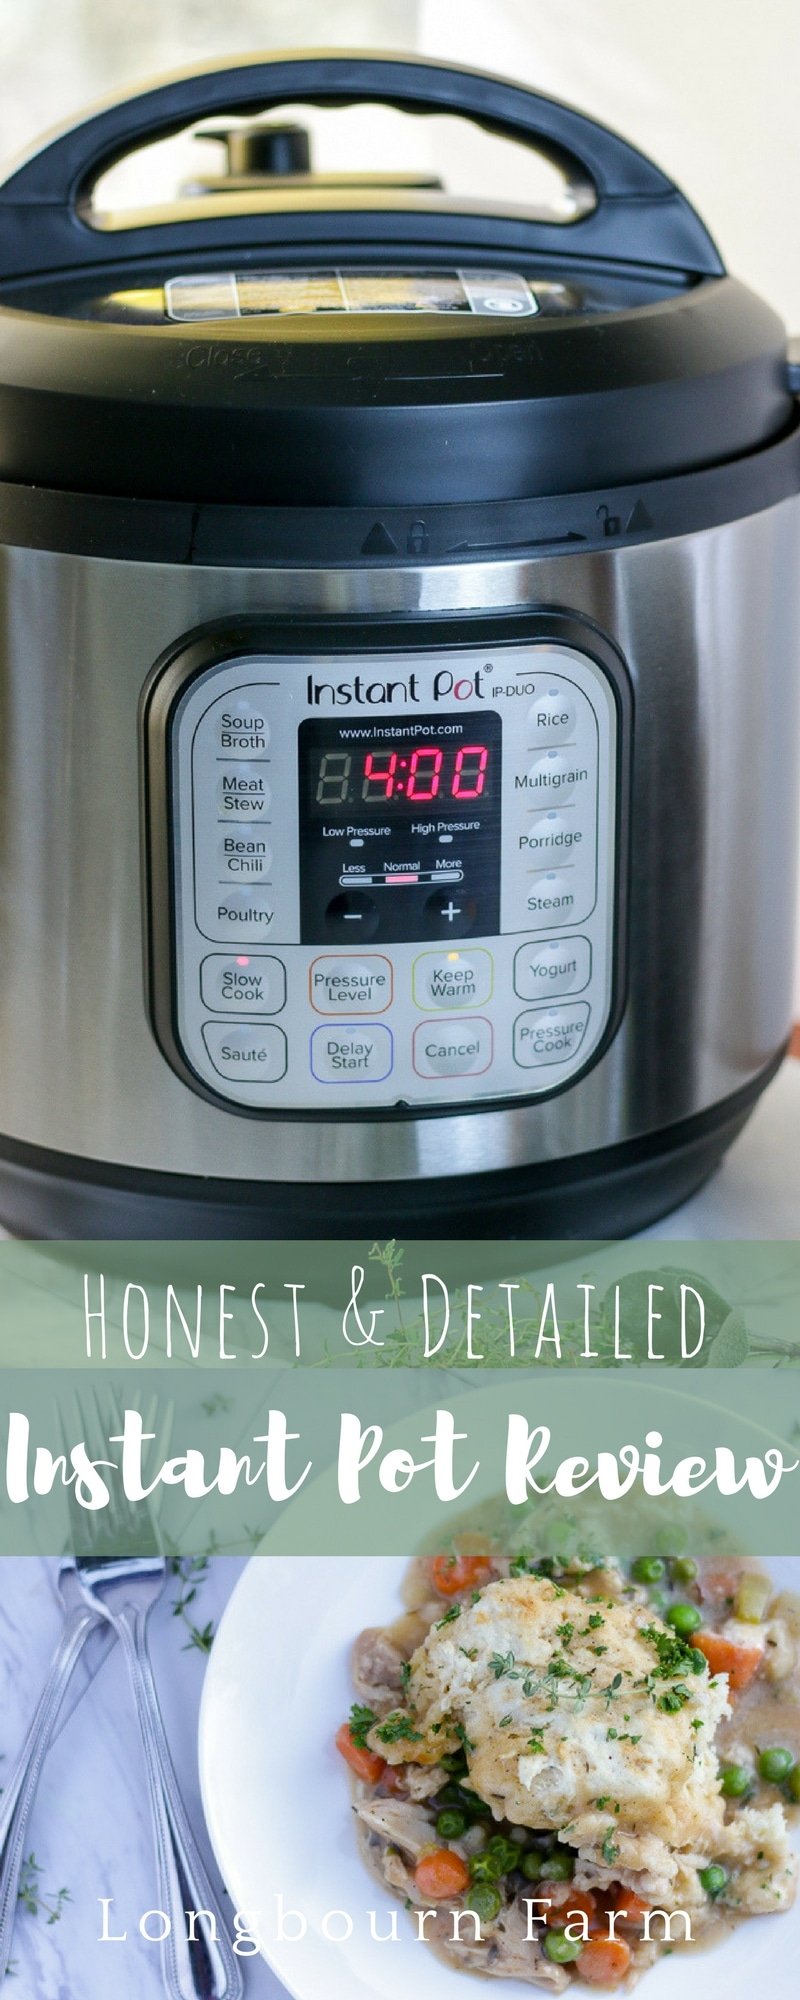 Is an Instant Pot 8 Quart worth it? Read a detailed list of pros and cons from an initial skeptic. I tried a lot of recipes and here is what I think!